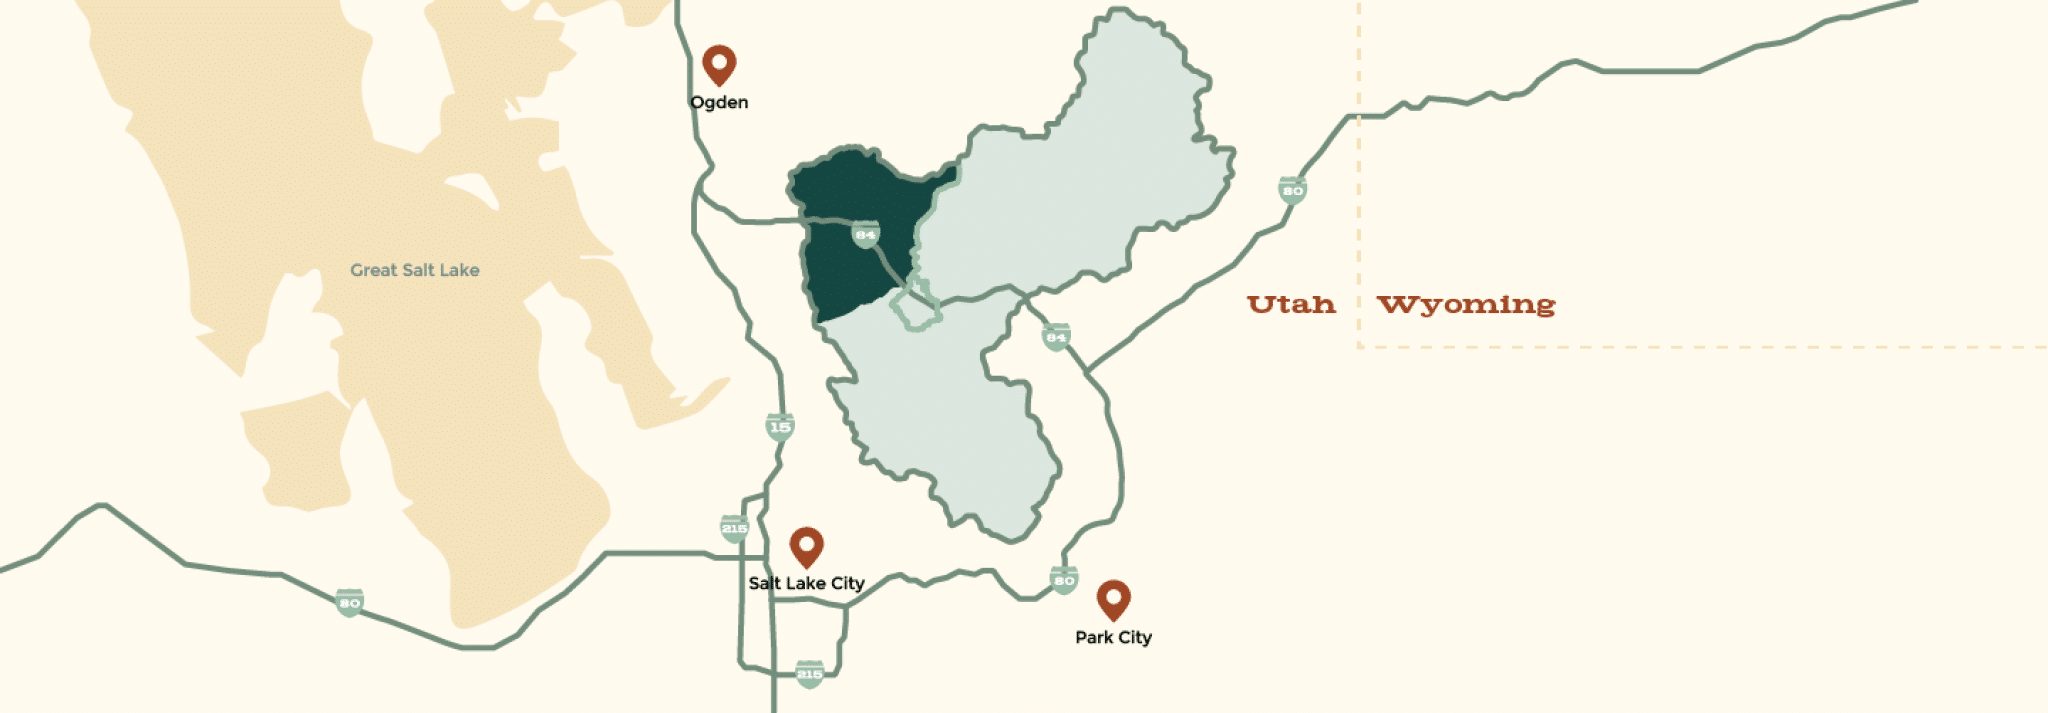 Morgan Valley Location. A stylized map highlighting the states of Utah and Wyoming, with red location pins marking Ogden, Salt Lake City, and Park City in Utah. The Great Salt Lake is prominently featured in dark shading.